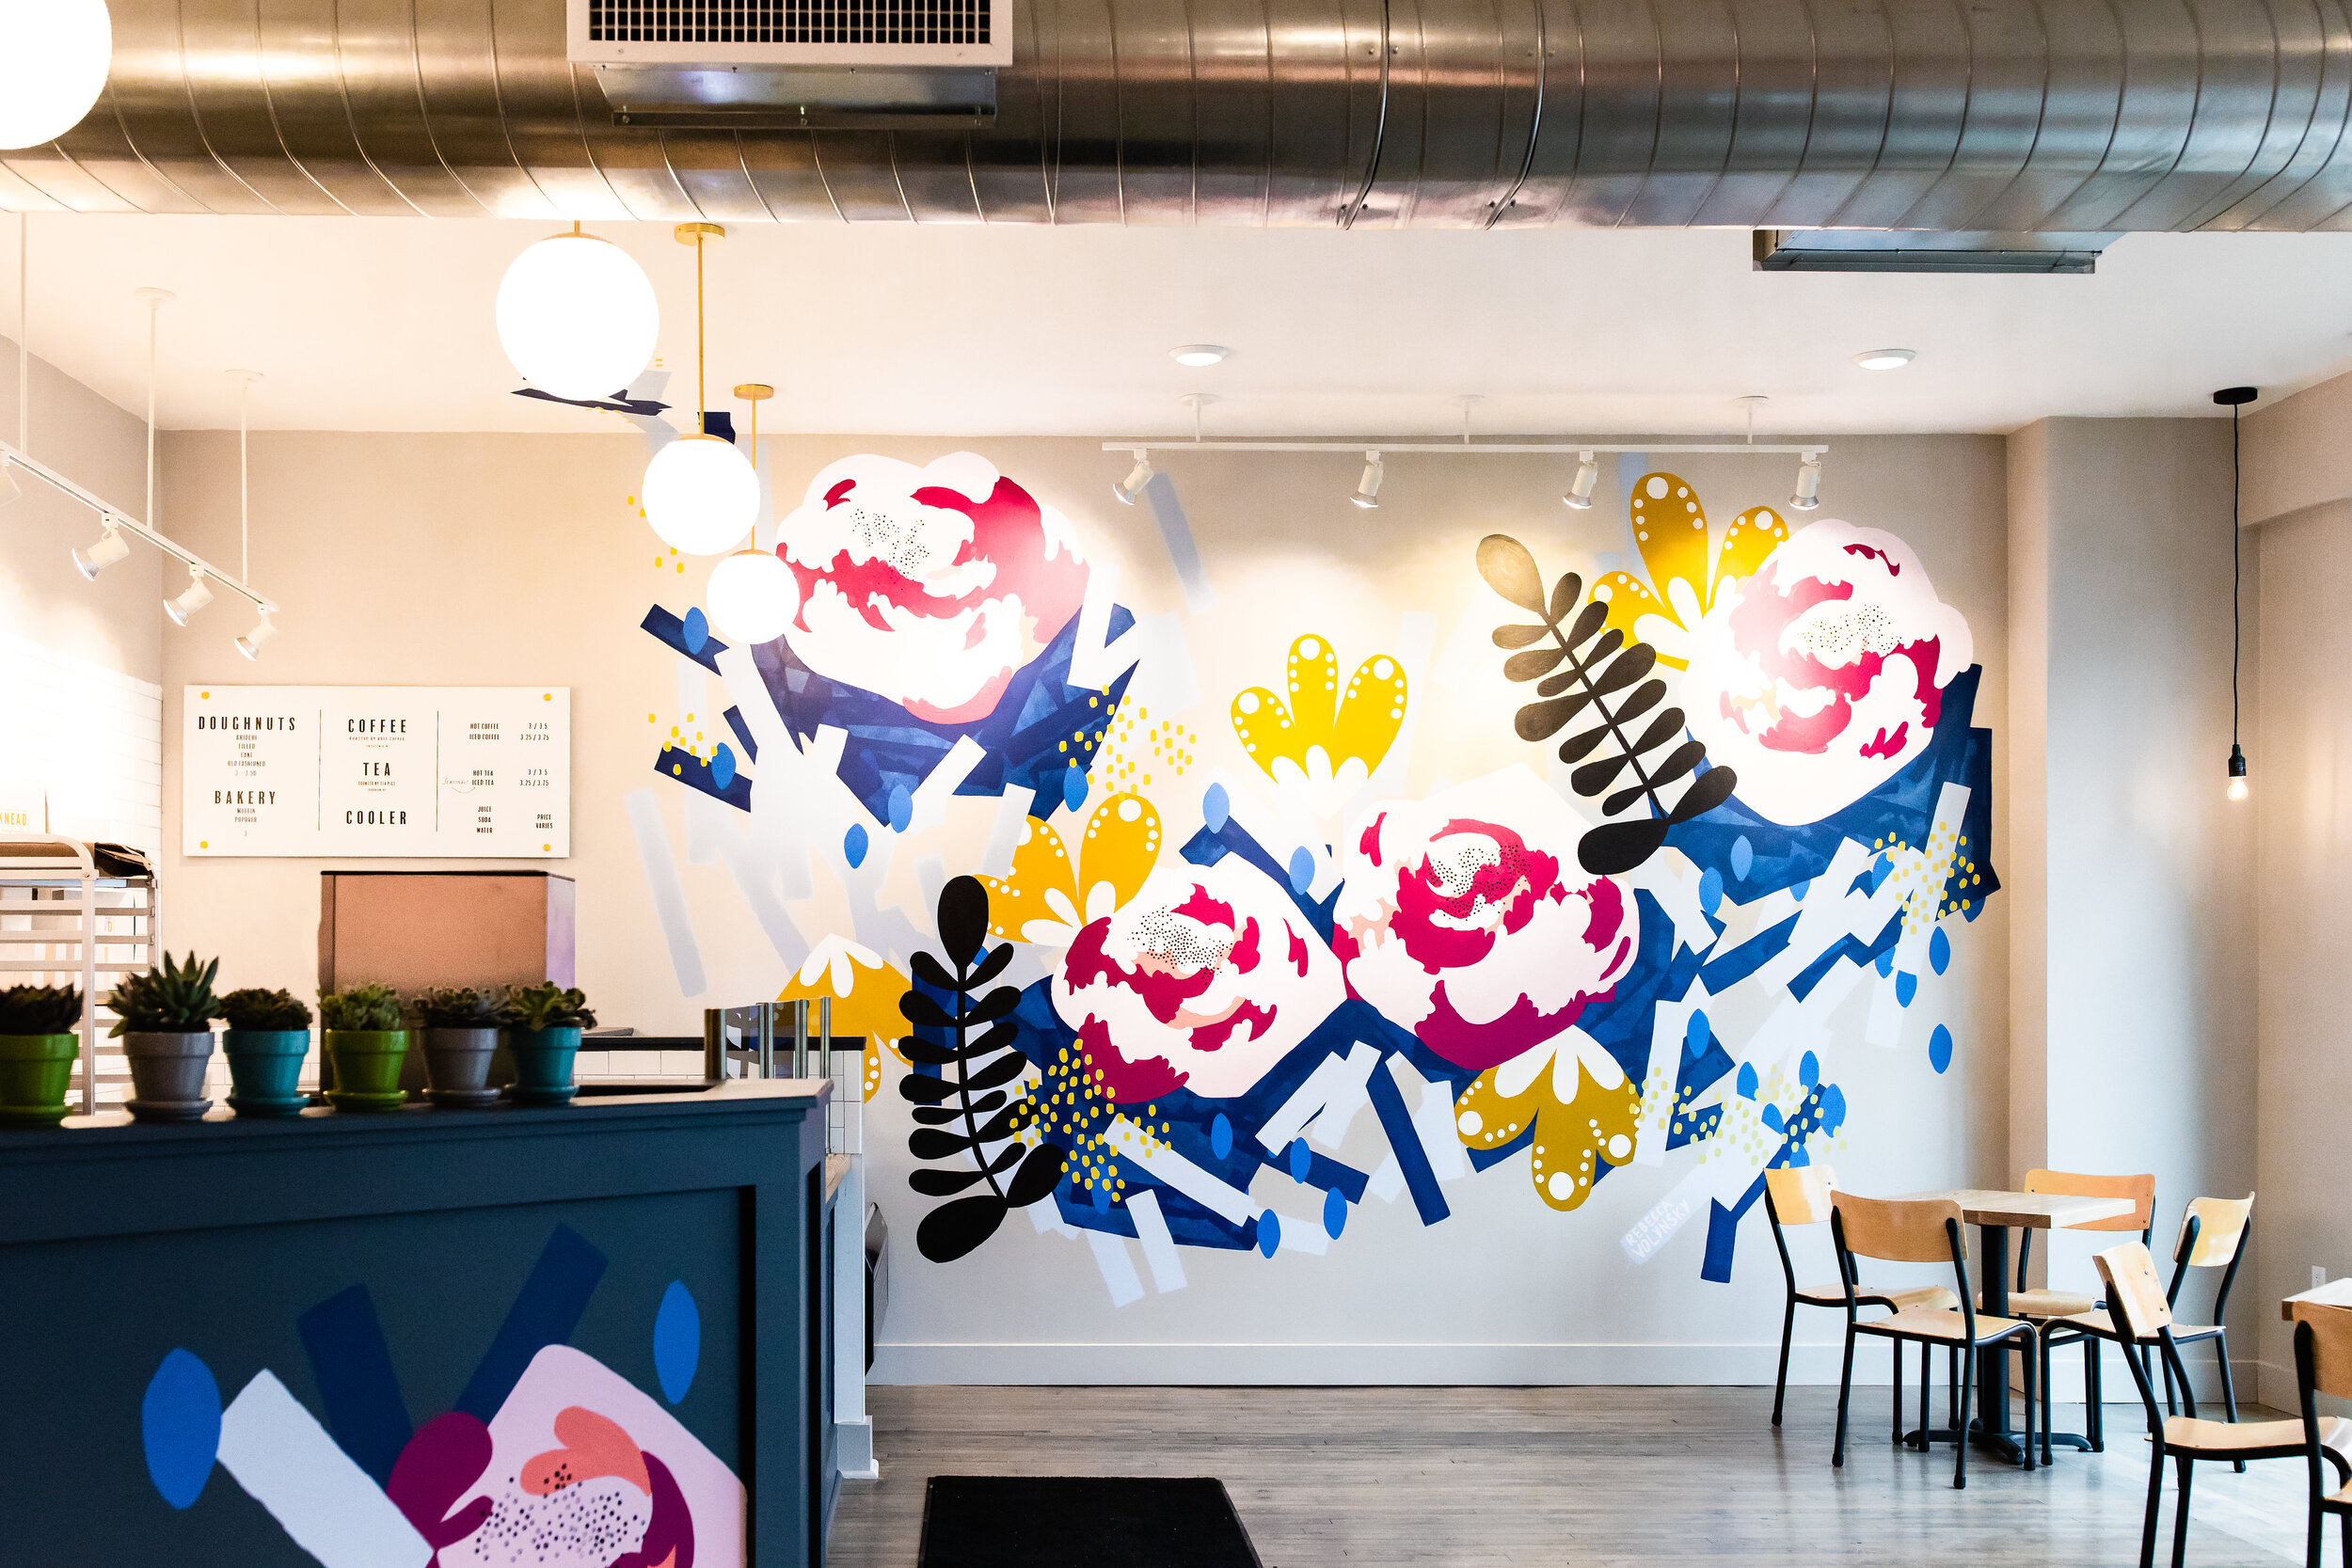  Commissioned mural for Knead Doughnuts at 135 Elmgrove Ave. in Providence, Rhode Island. This piece was designed and painted by hand in April 2018. 